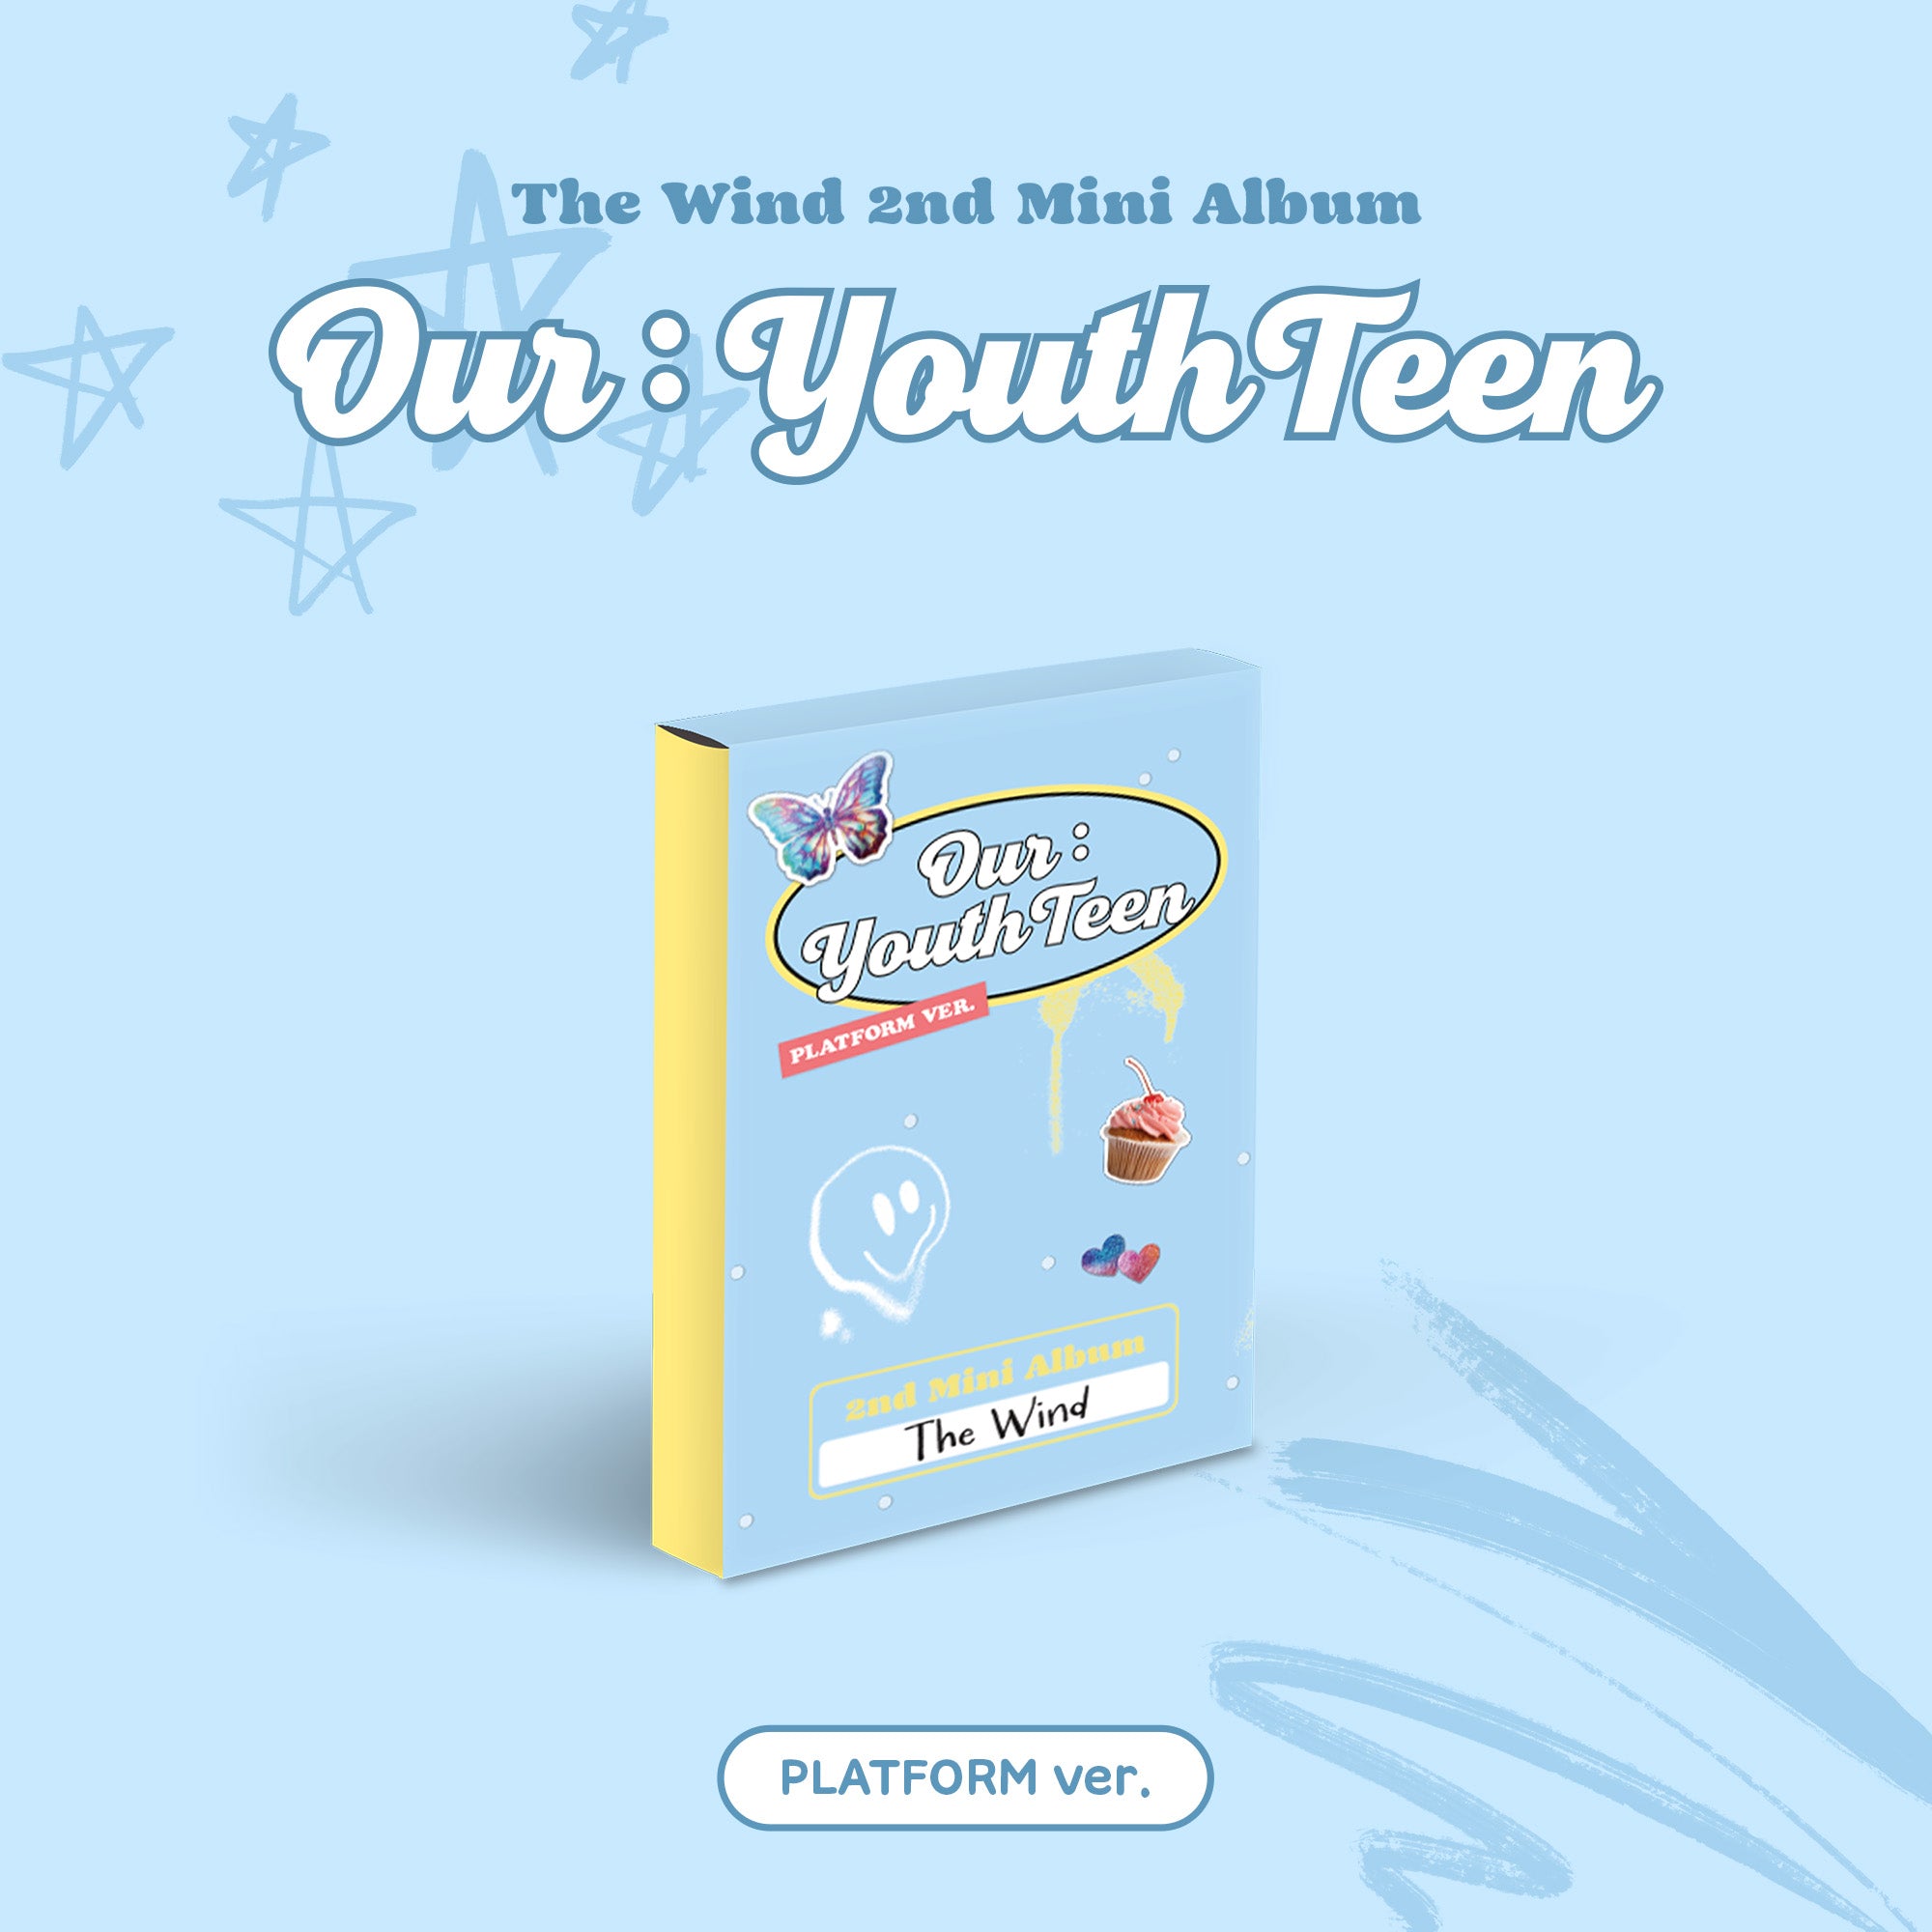 The Wind - 2nd Mini Album Our : YouthTeen (Platform ver.)